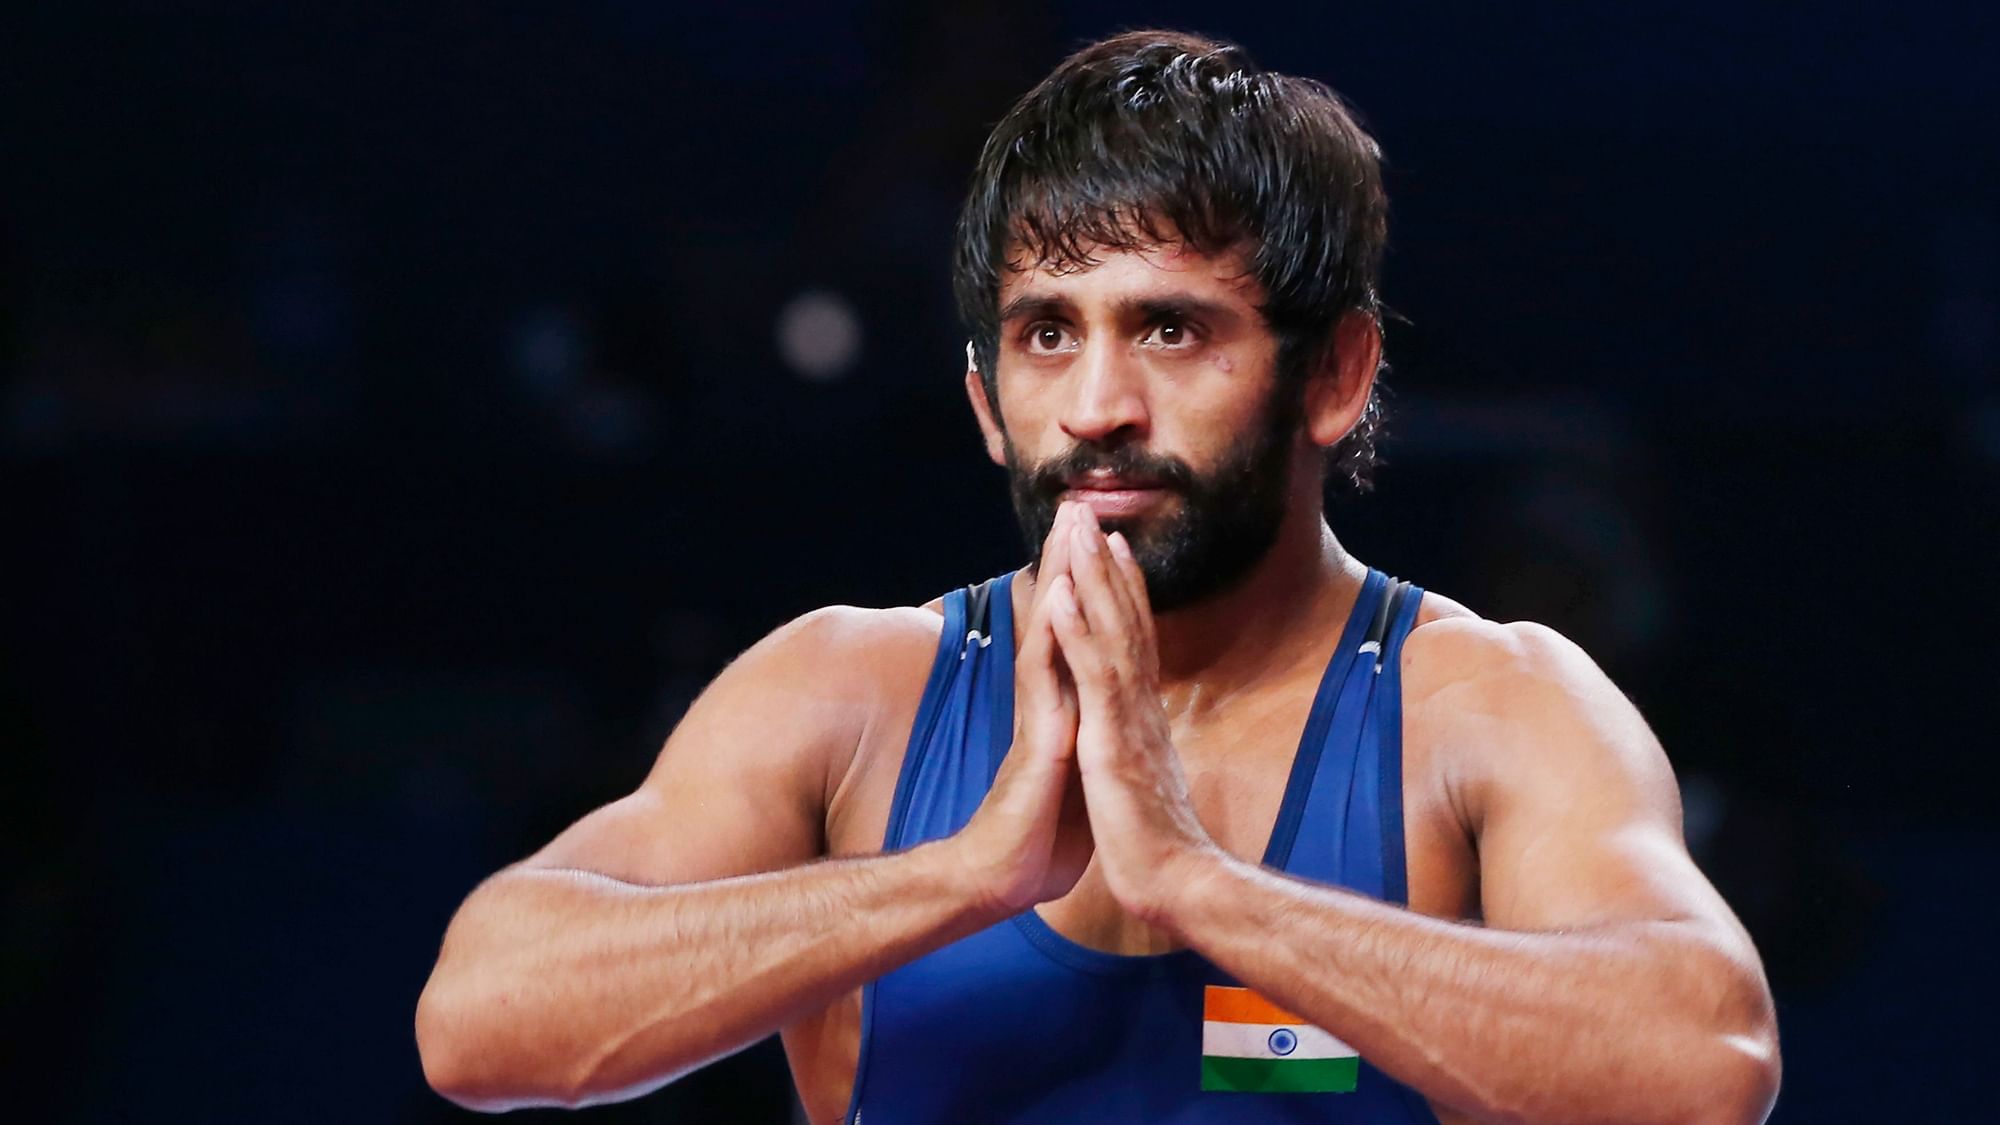 Indian wrestler Bajrang Punia lost the top rank in the 65kg category in the latest rankings issued by the international federation.